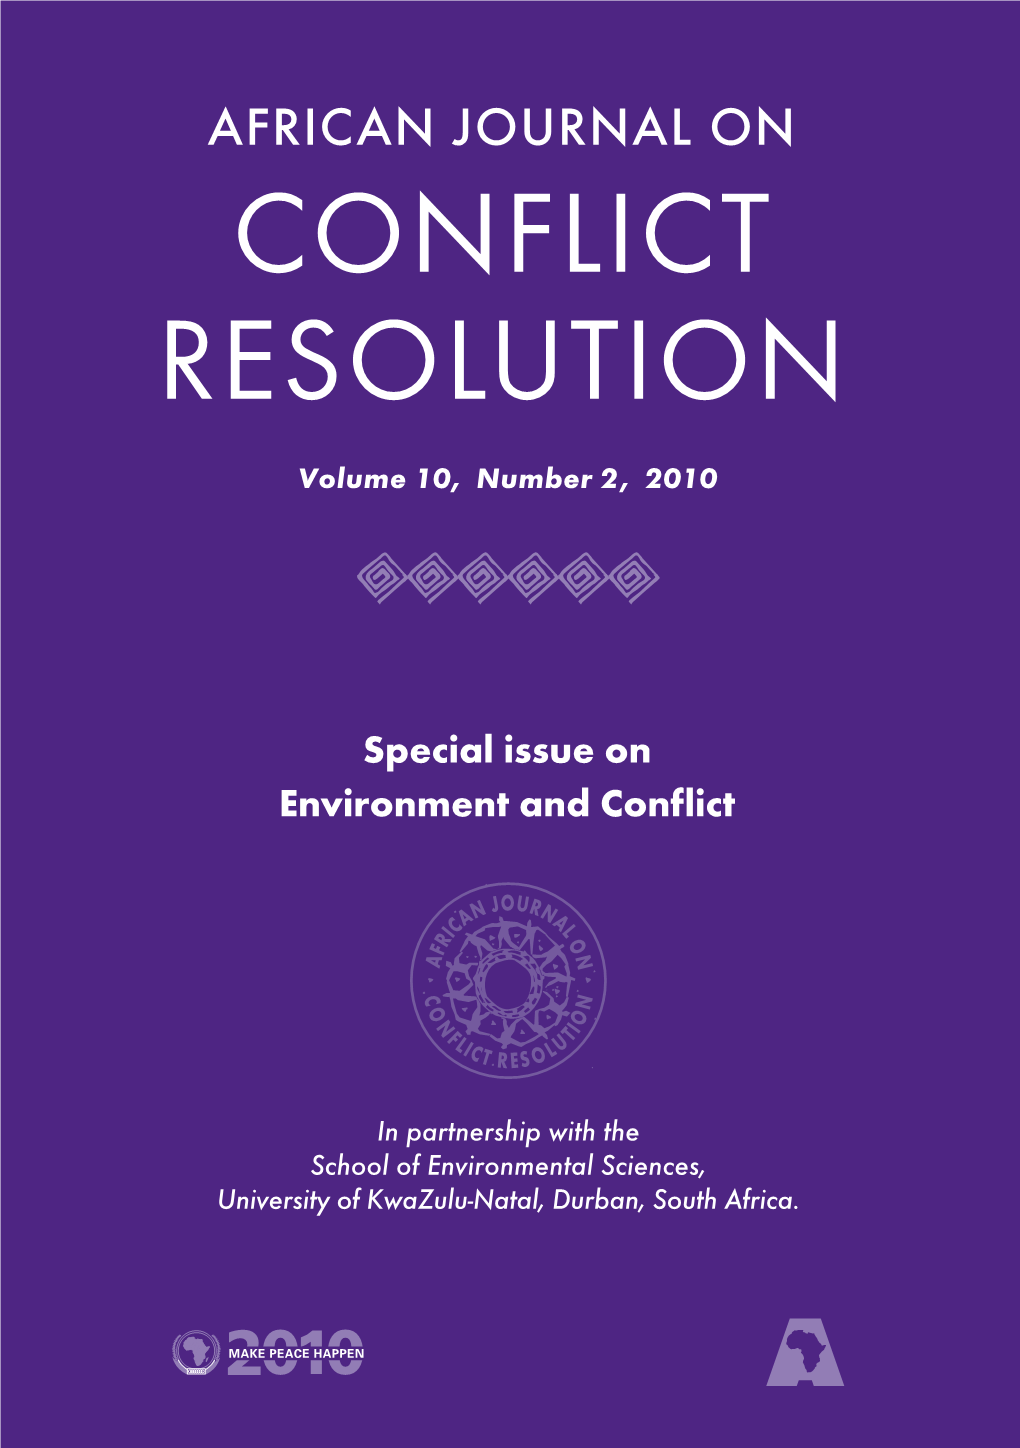 African Journal on Conflict Resolution